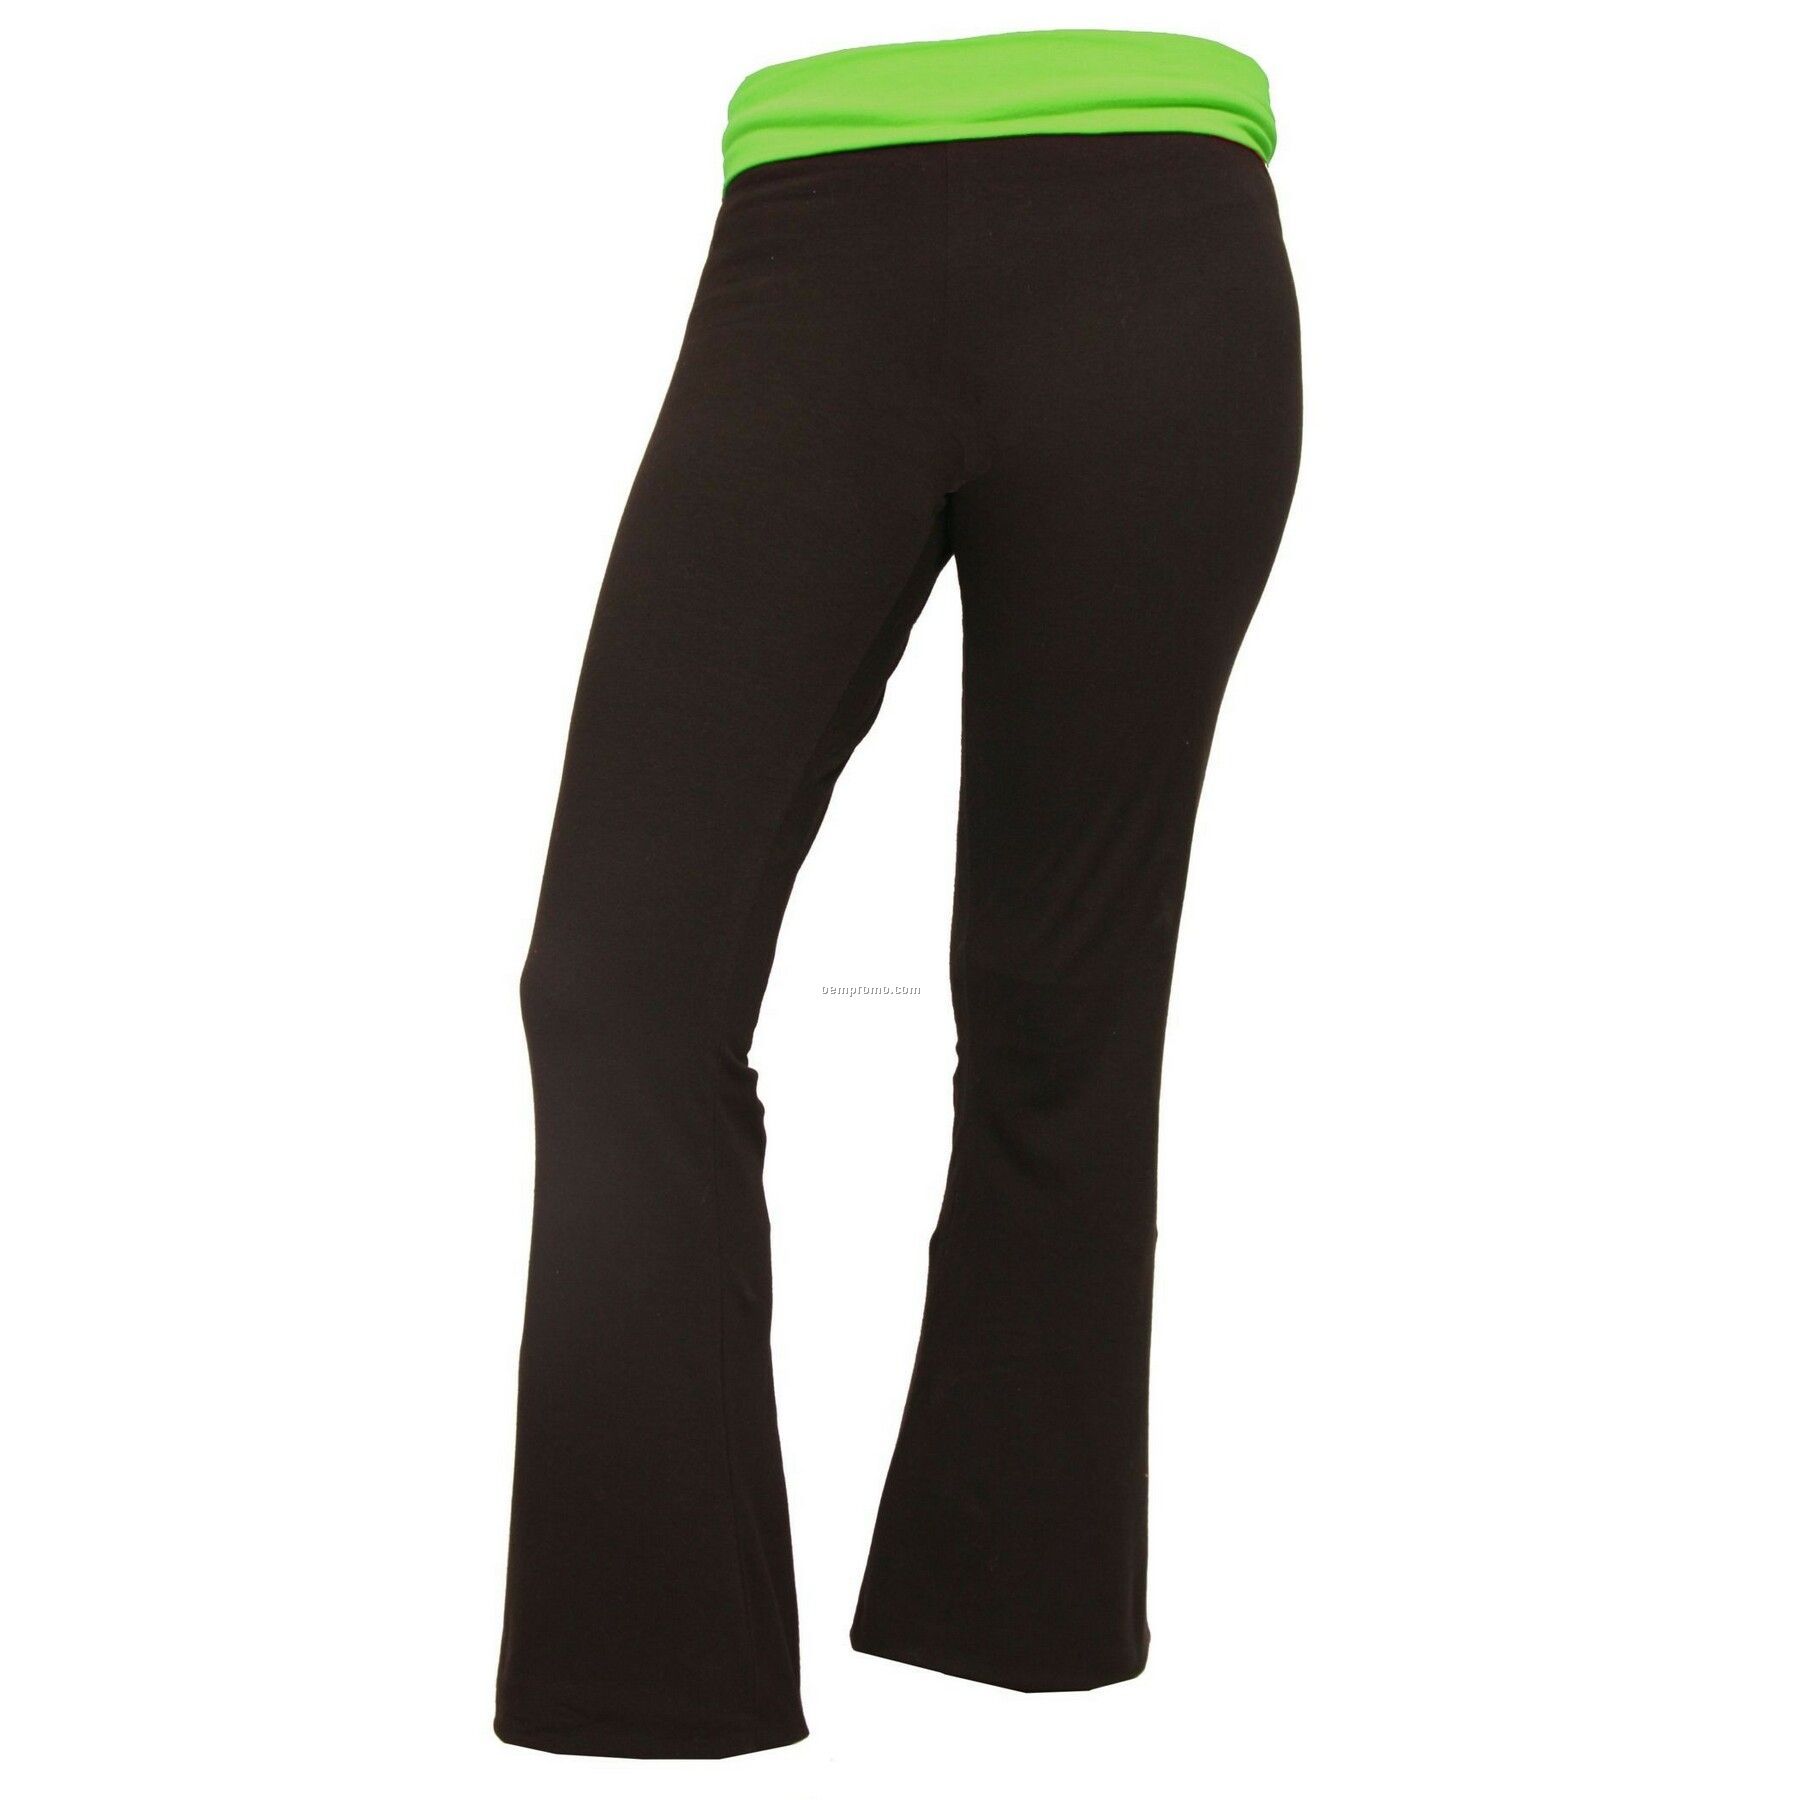 Youth Lime Green Practice Pants